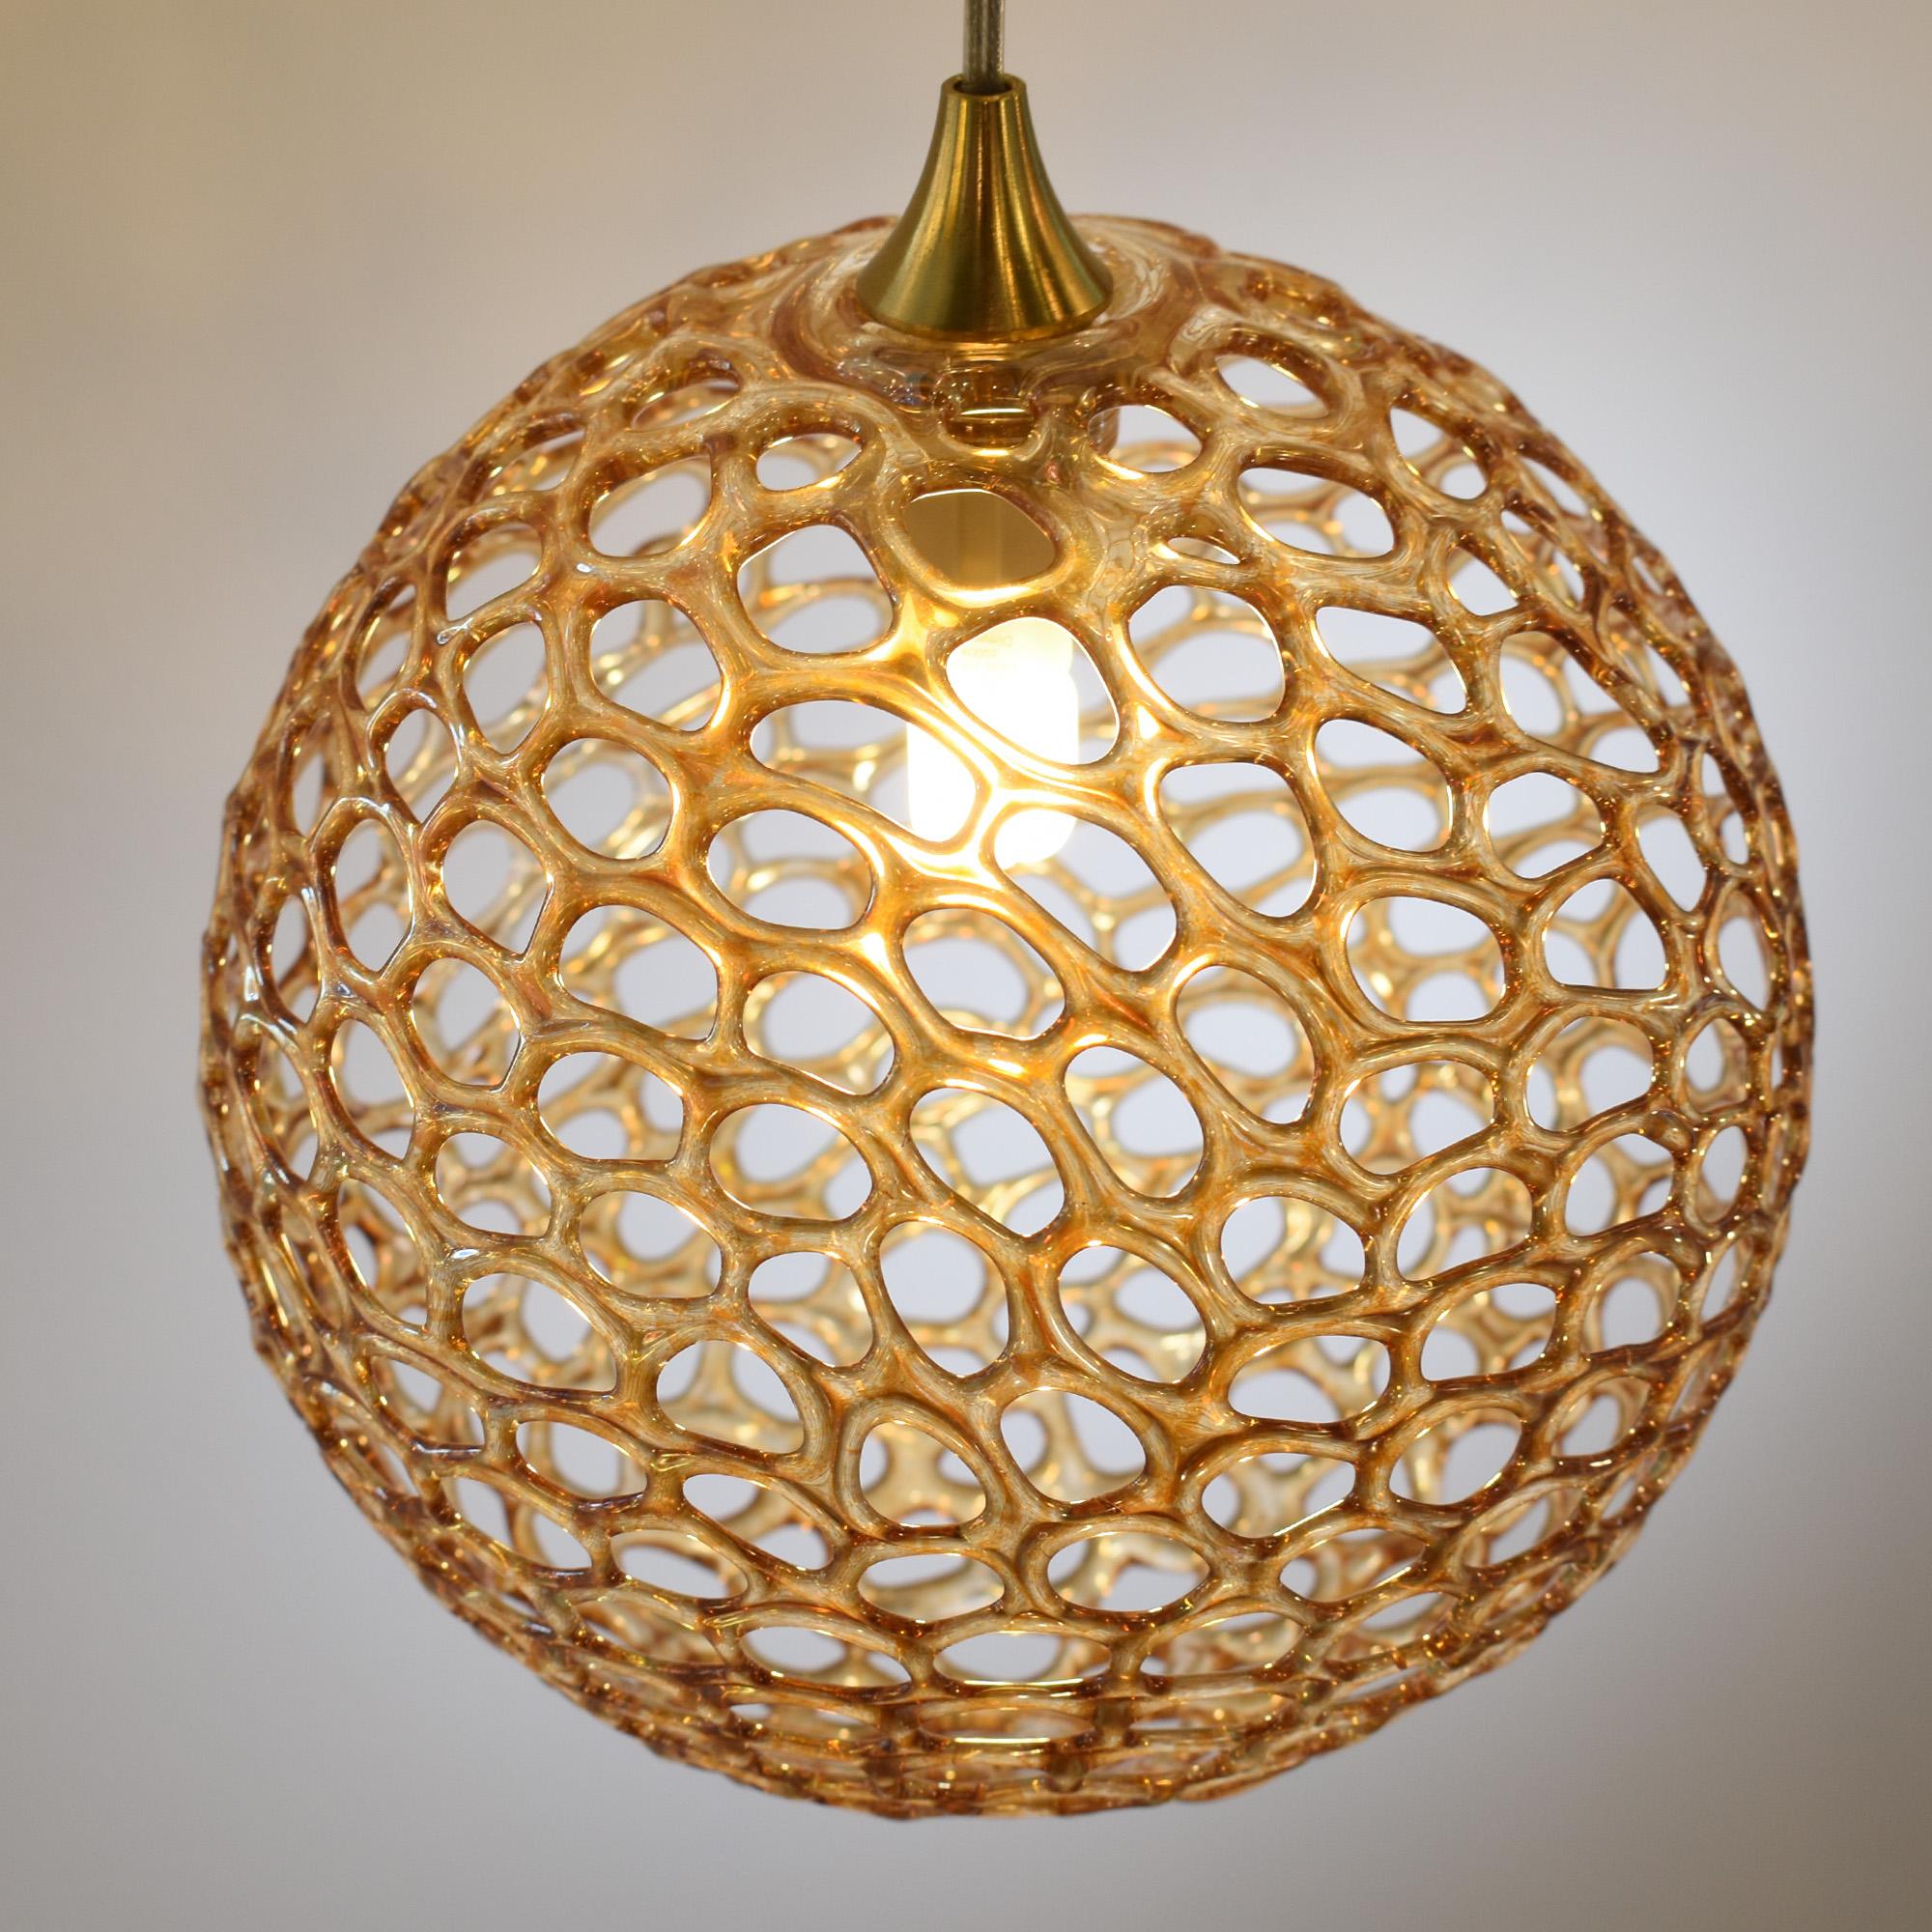 The Napa Chandelier will light your space surfaces with a warm and natural light while creating magical games of light and shadows on your room walls and ceiling. Glass spheres convey the concepts of lightness and transparency together with the